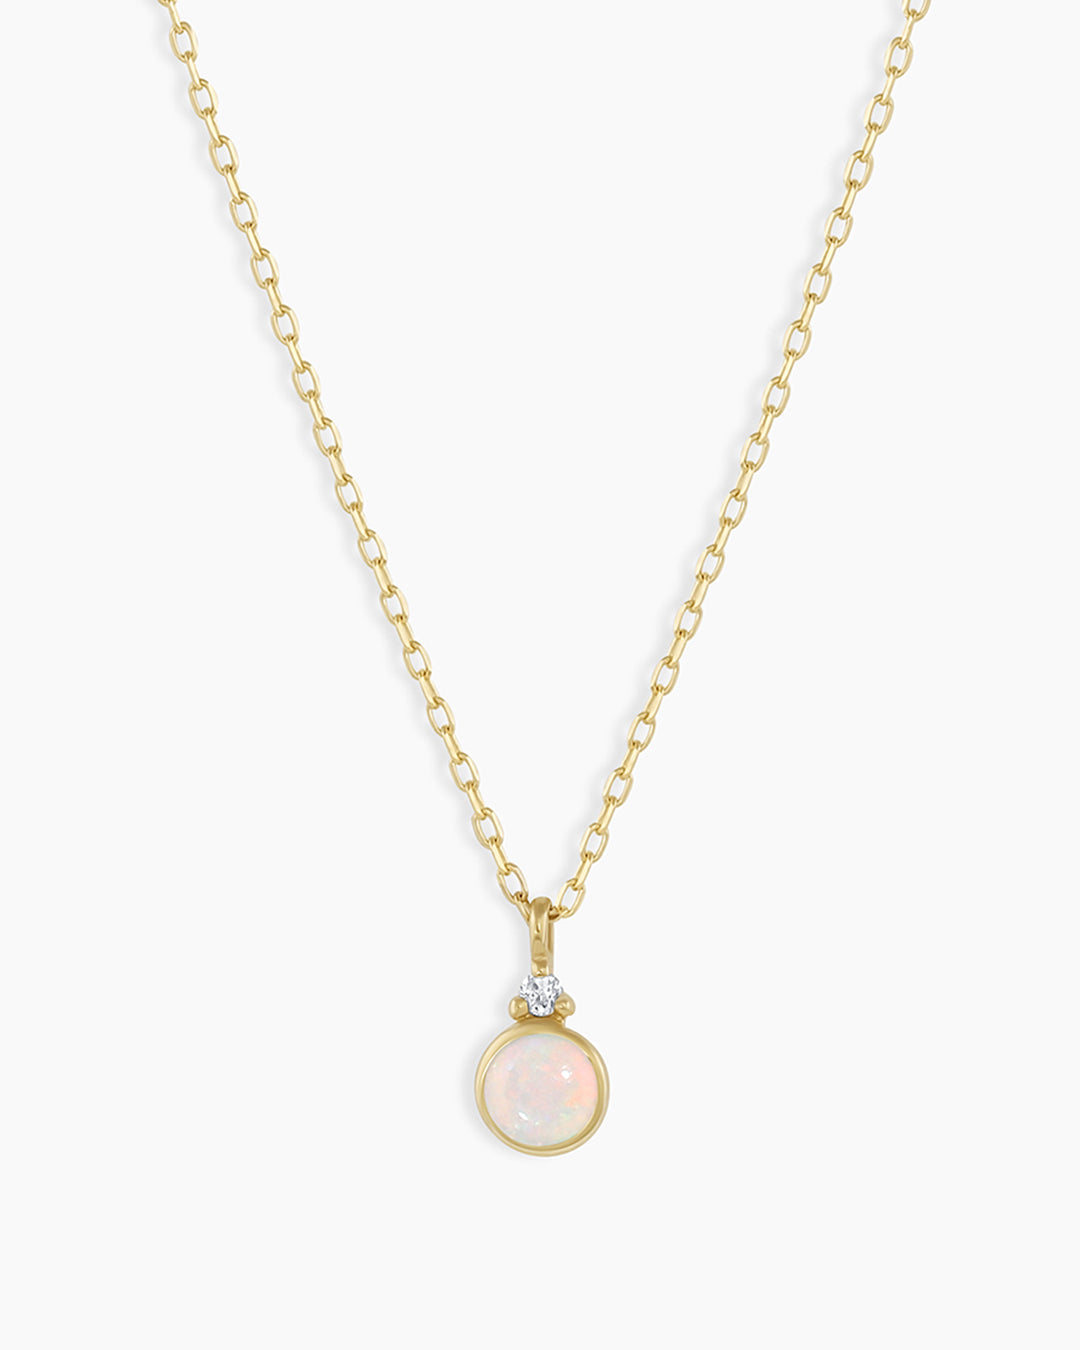 Shop These Pearl Accessories For Your June Birthstone